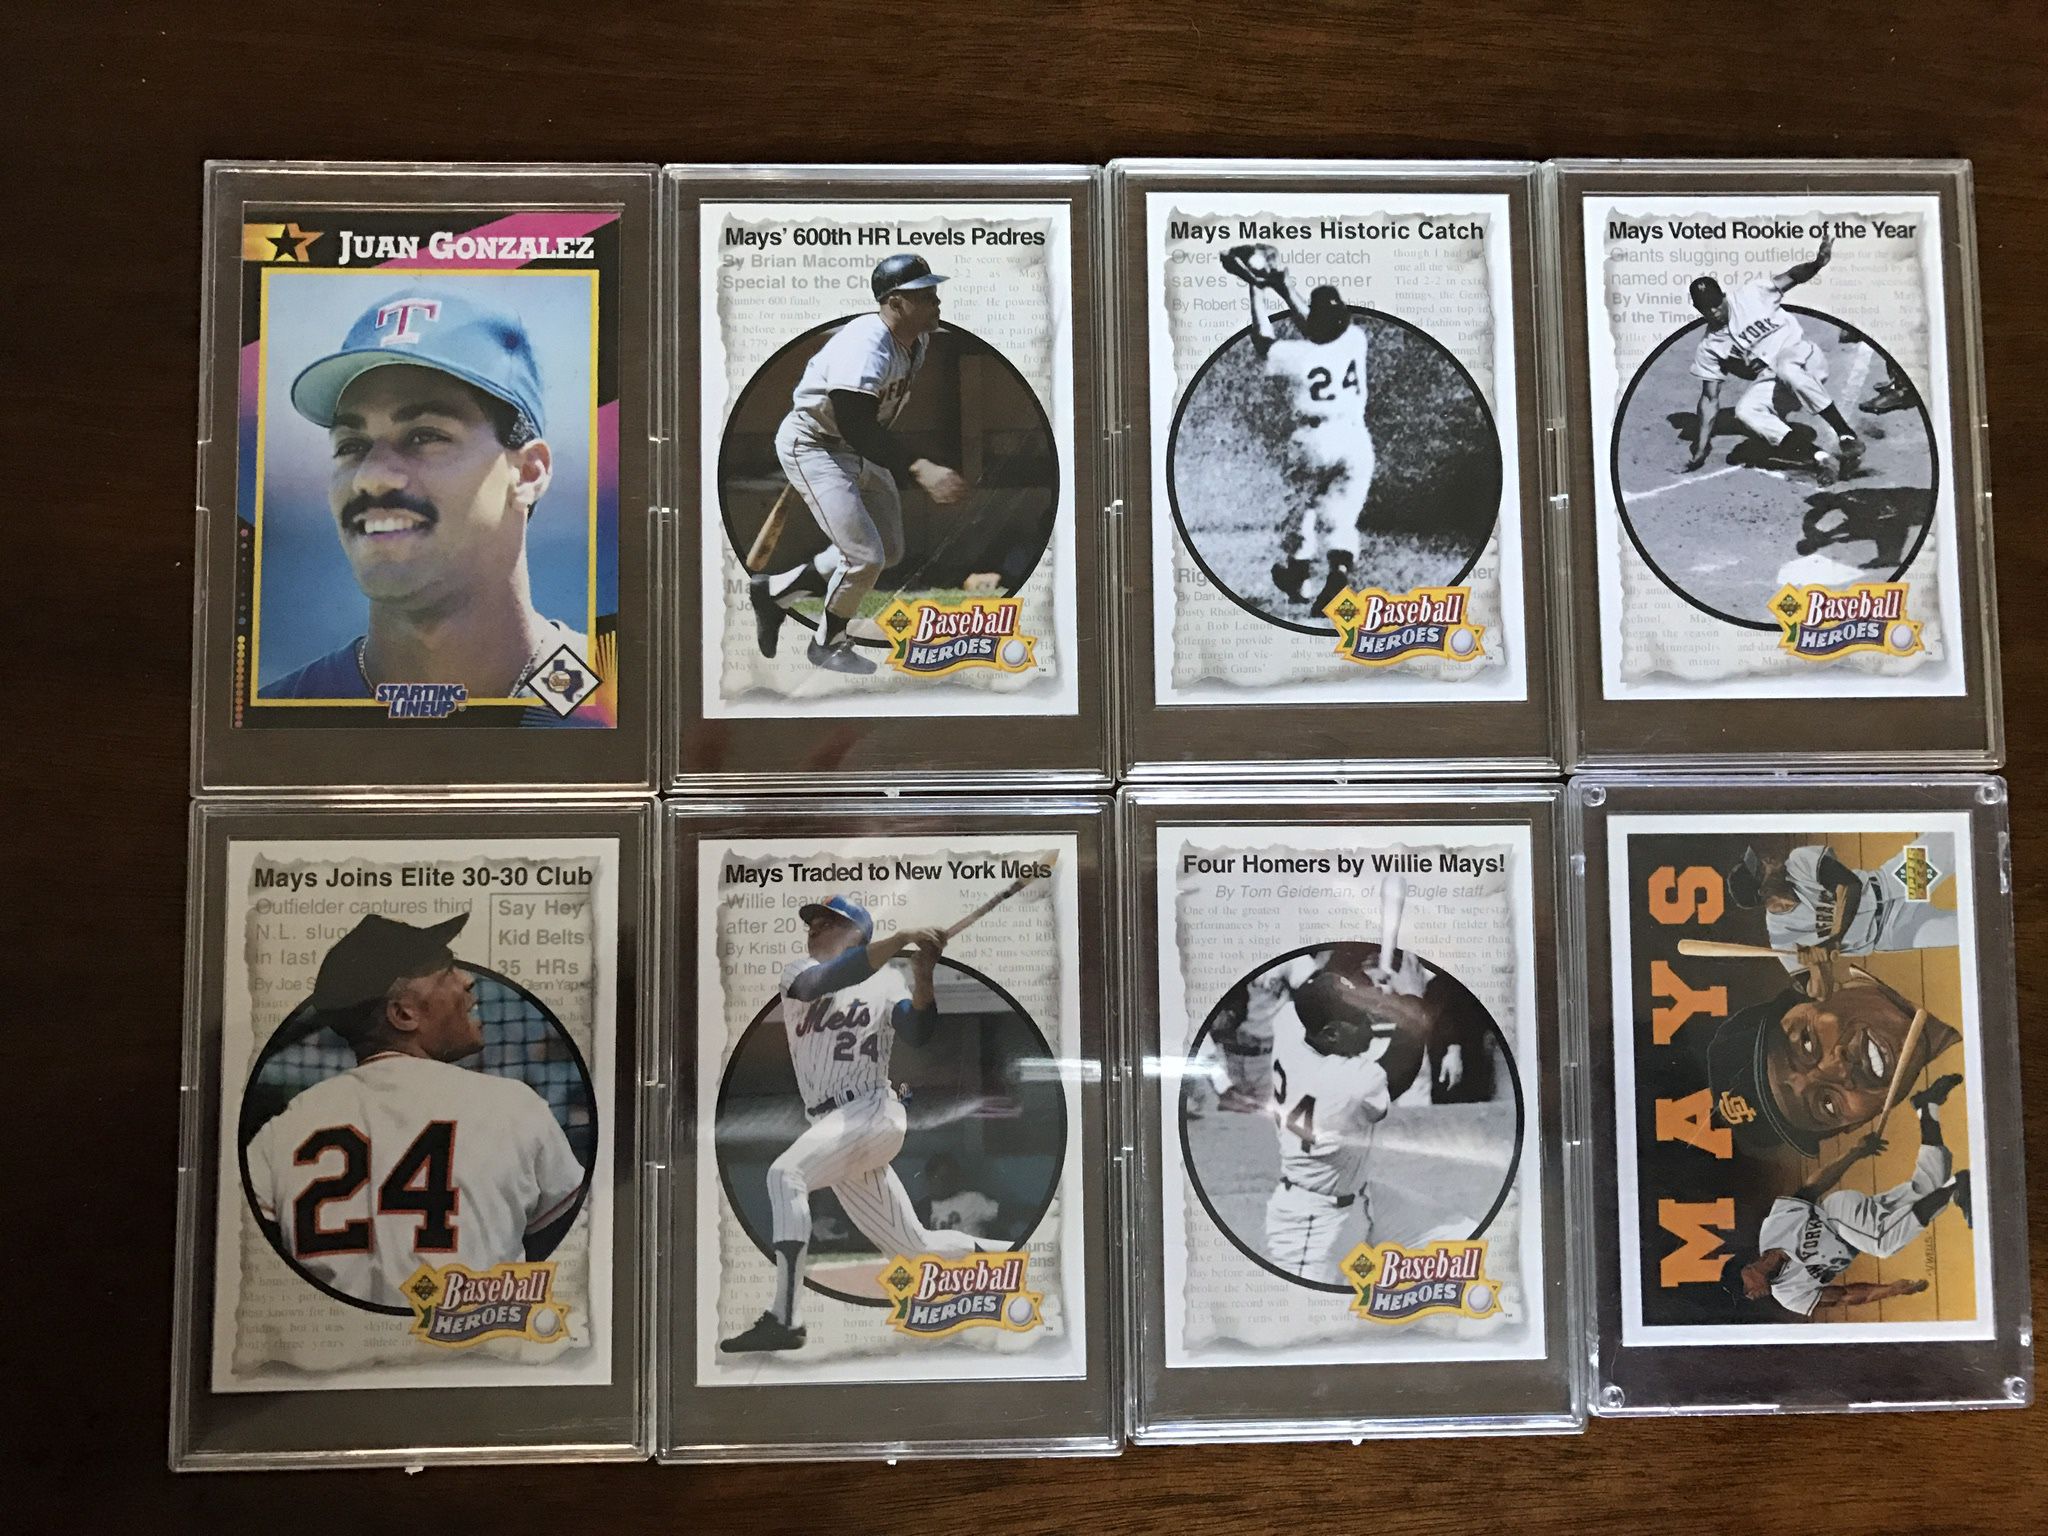 Baseball Cards - Price Is For Each Including The Case